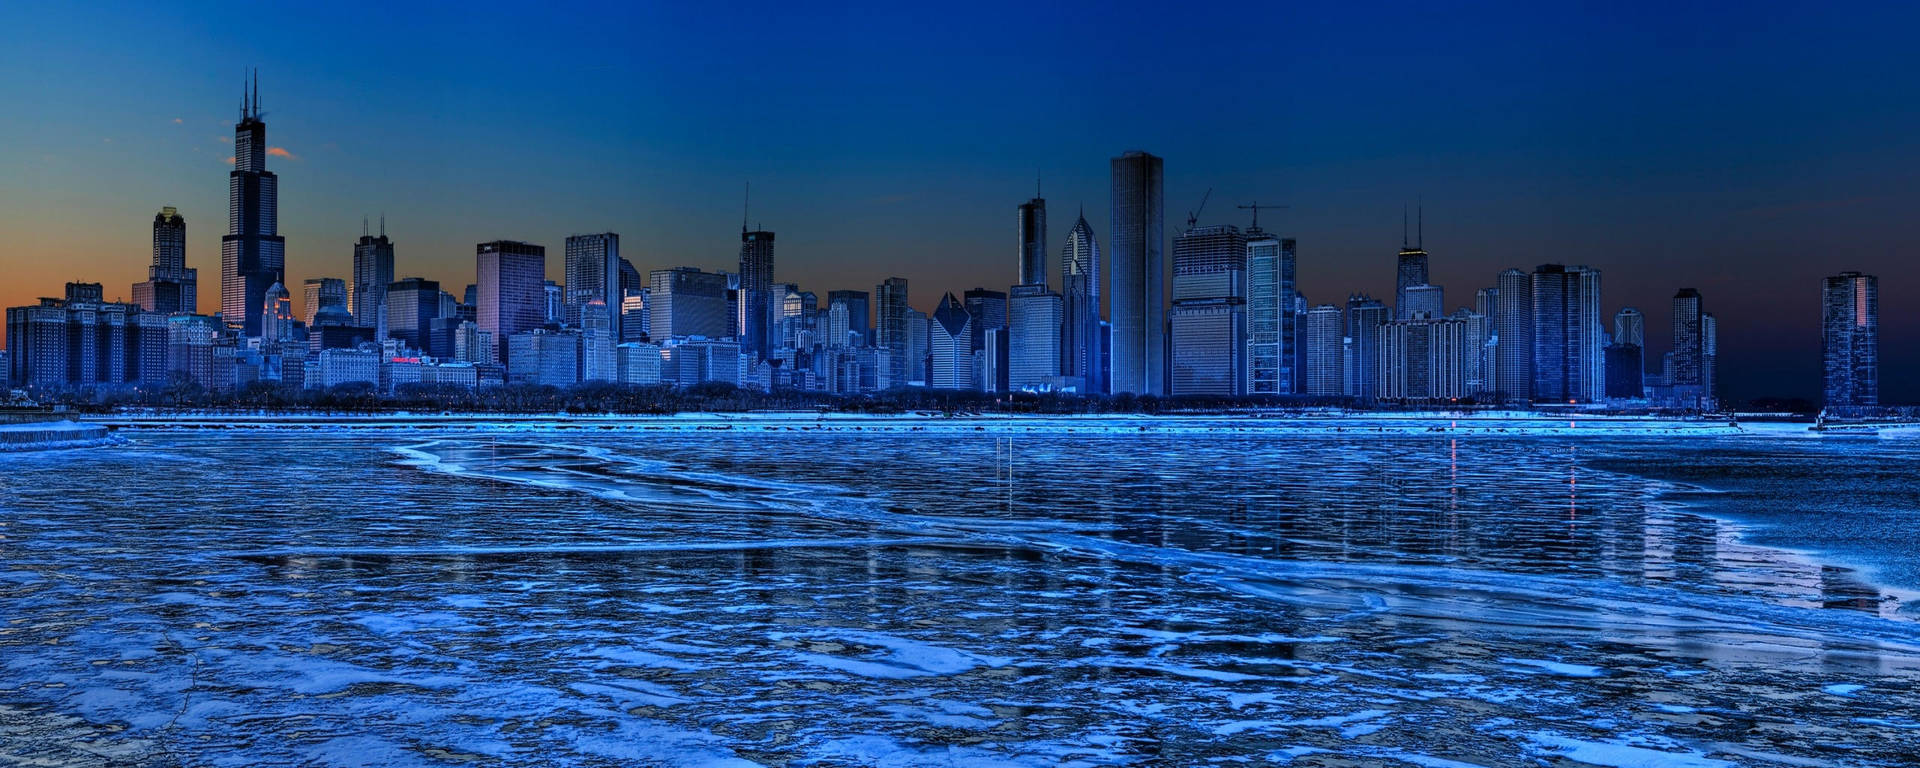 High Resolution Dual Monitor Chicago Waterfront Wallpaper